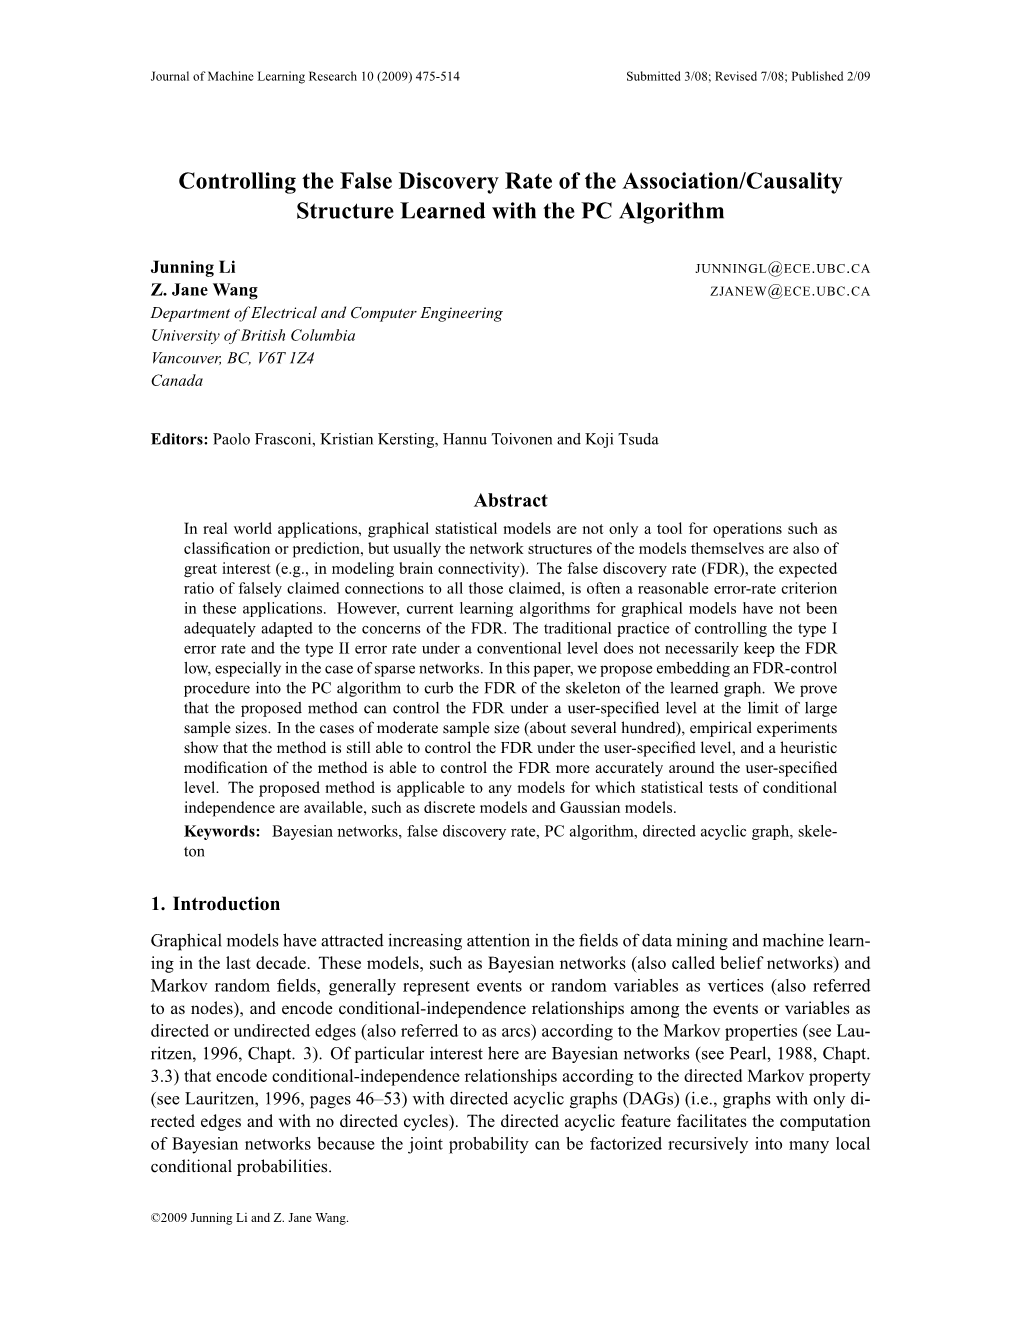 Controlling the False Discovery Rate of the Association/Causality Structure Learned with the PC Algorithm